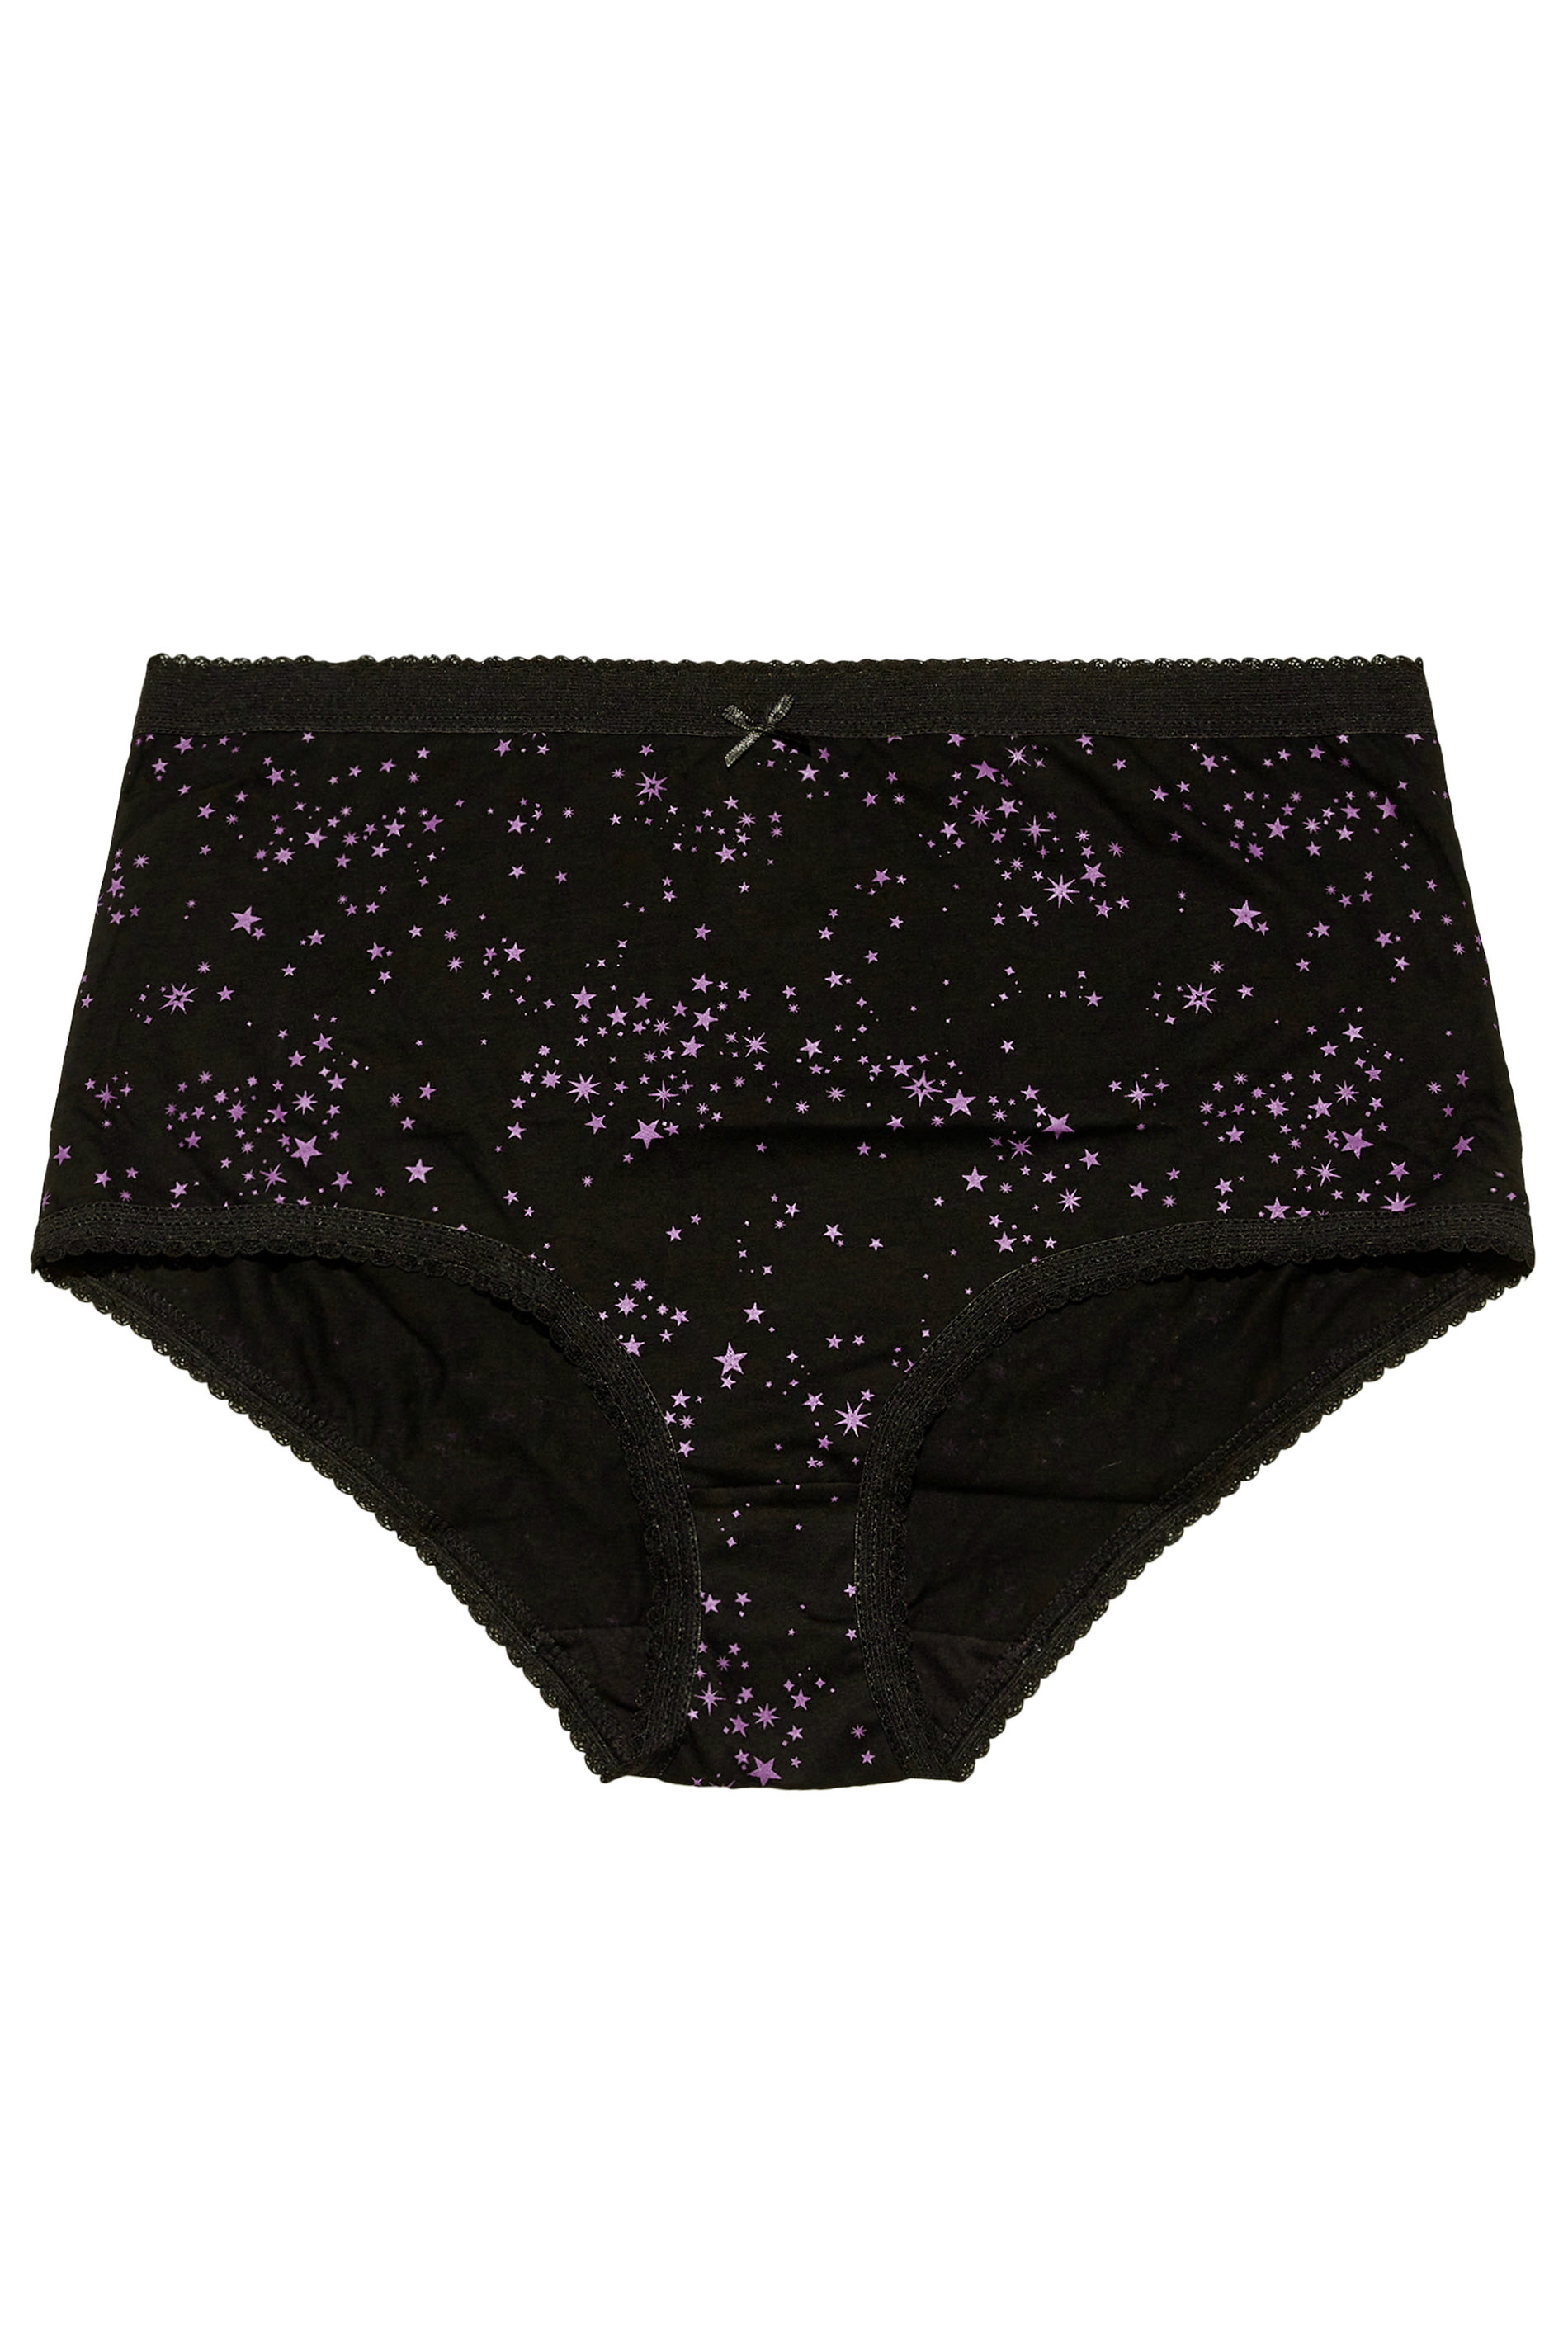 5 PACK Plus Size Purple Star Print High Waisted Full Briefs | Yours Clothing 3